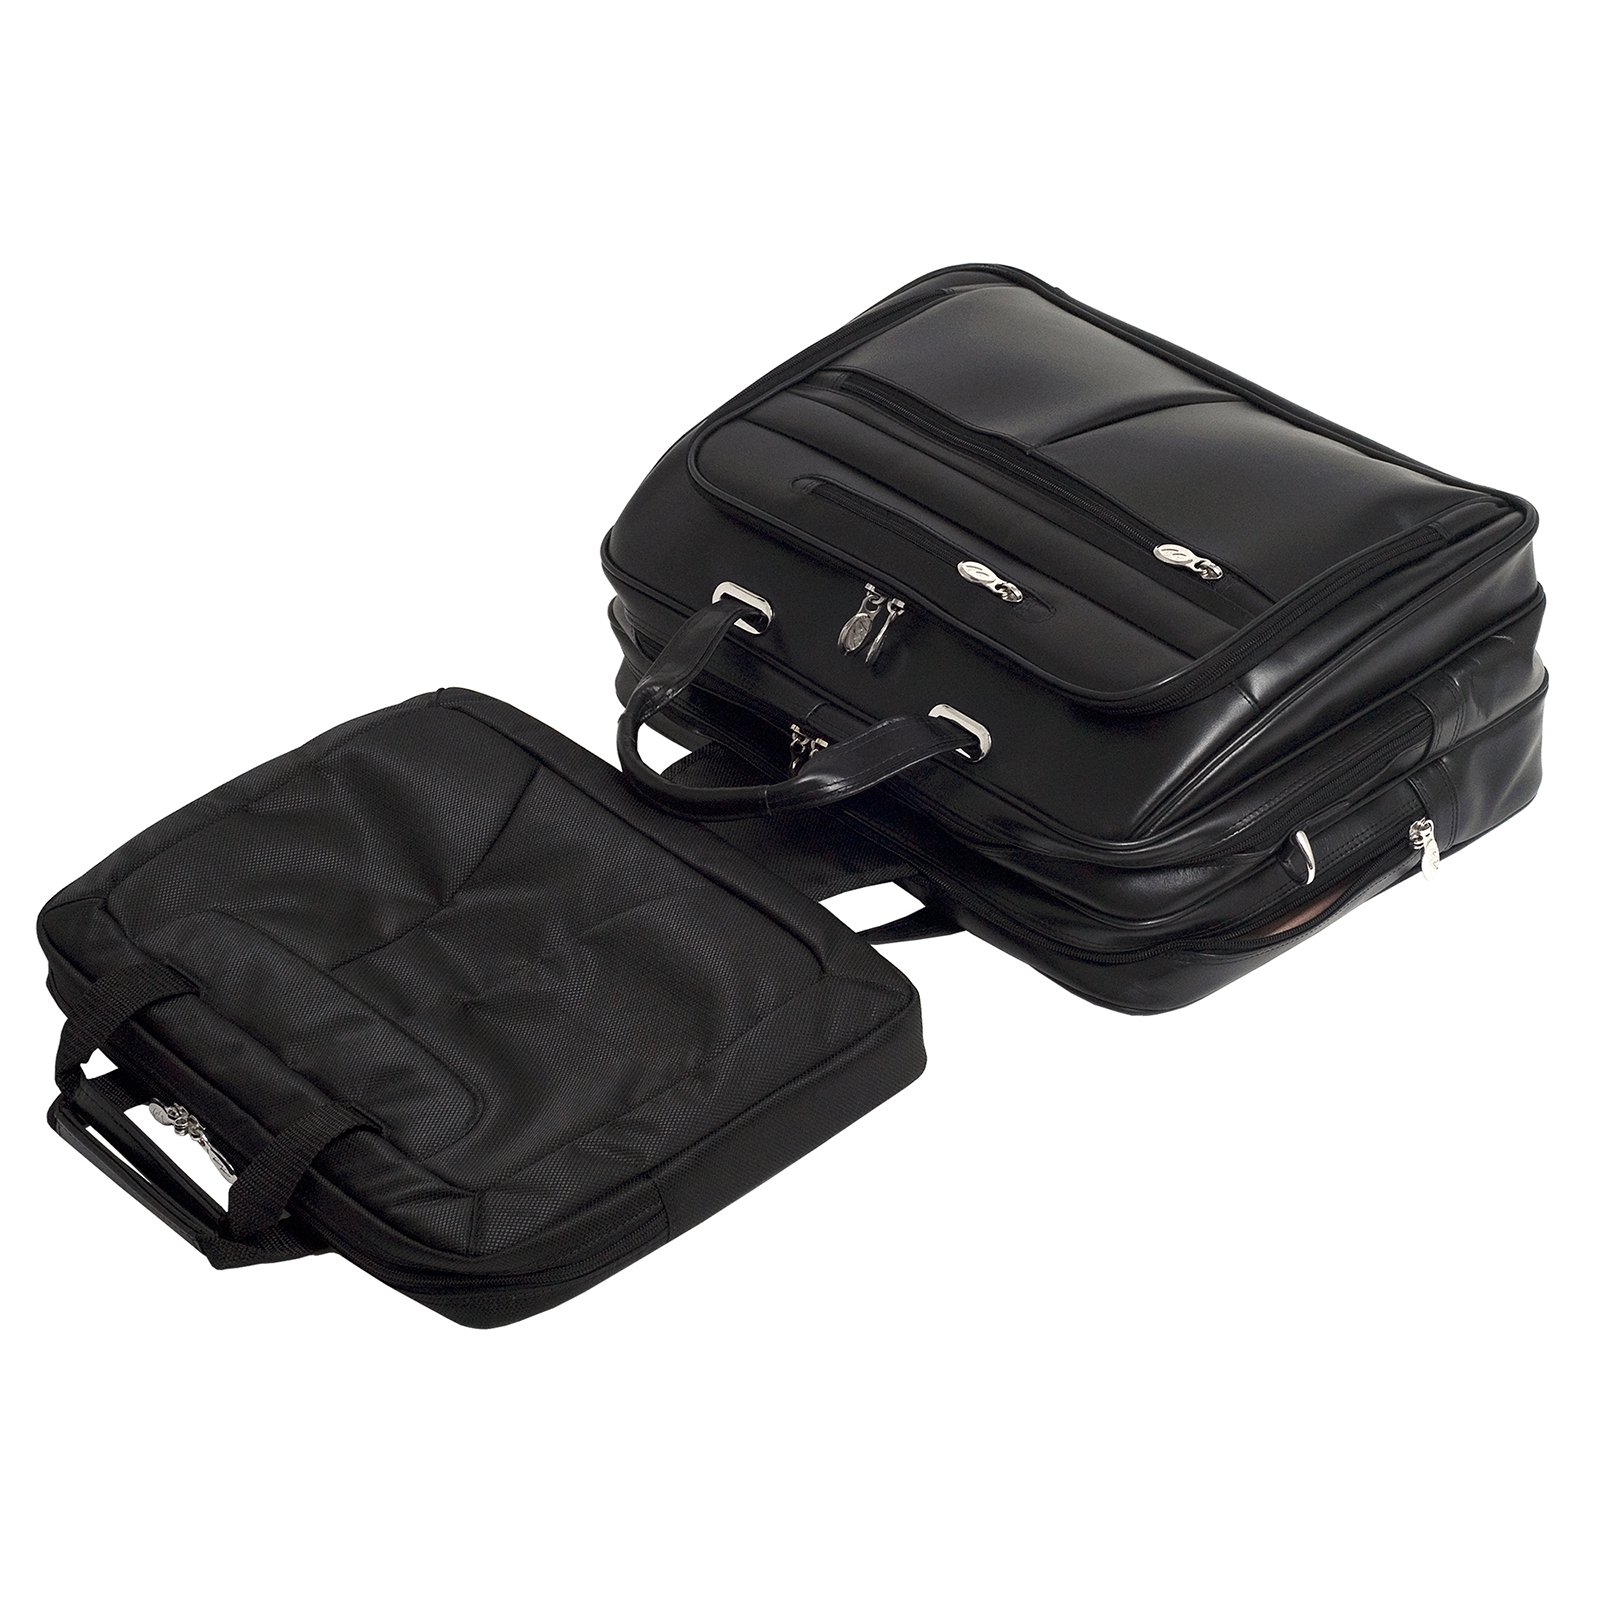 McKlein ROCKFORD, Checkpoint-Friendly Laptop Briefcase, Top Grain Cowhide Leather, Black (86515) - image 3 of 6